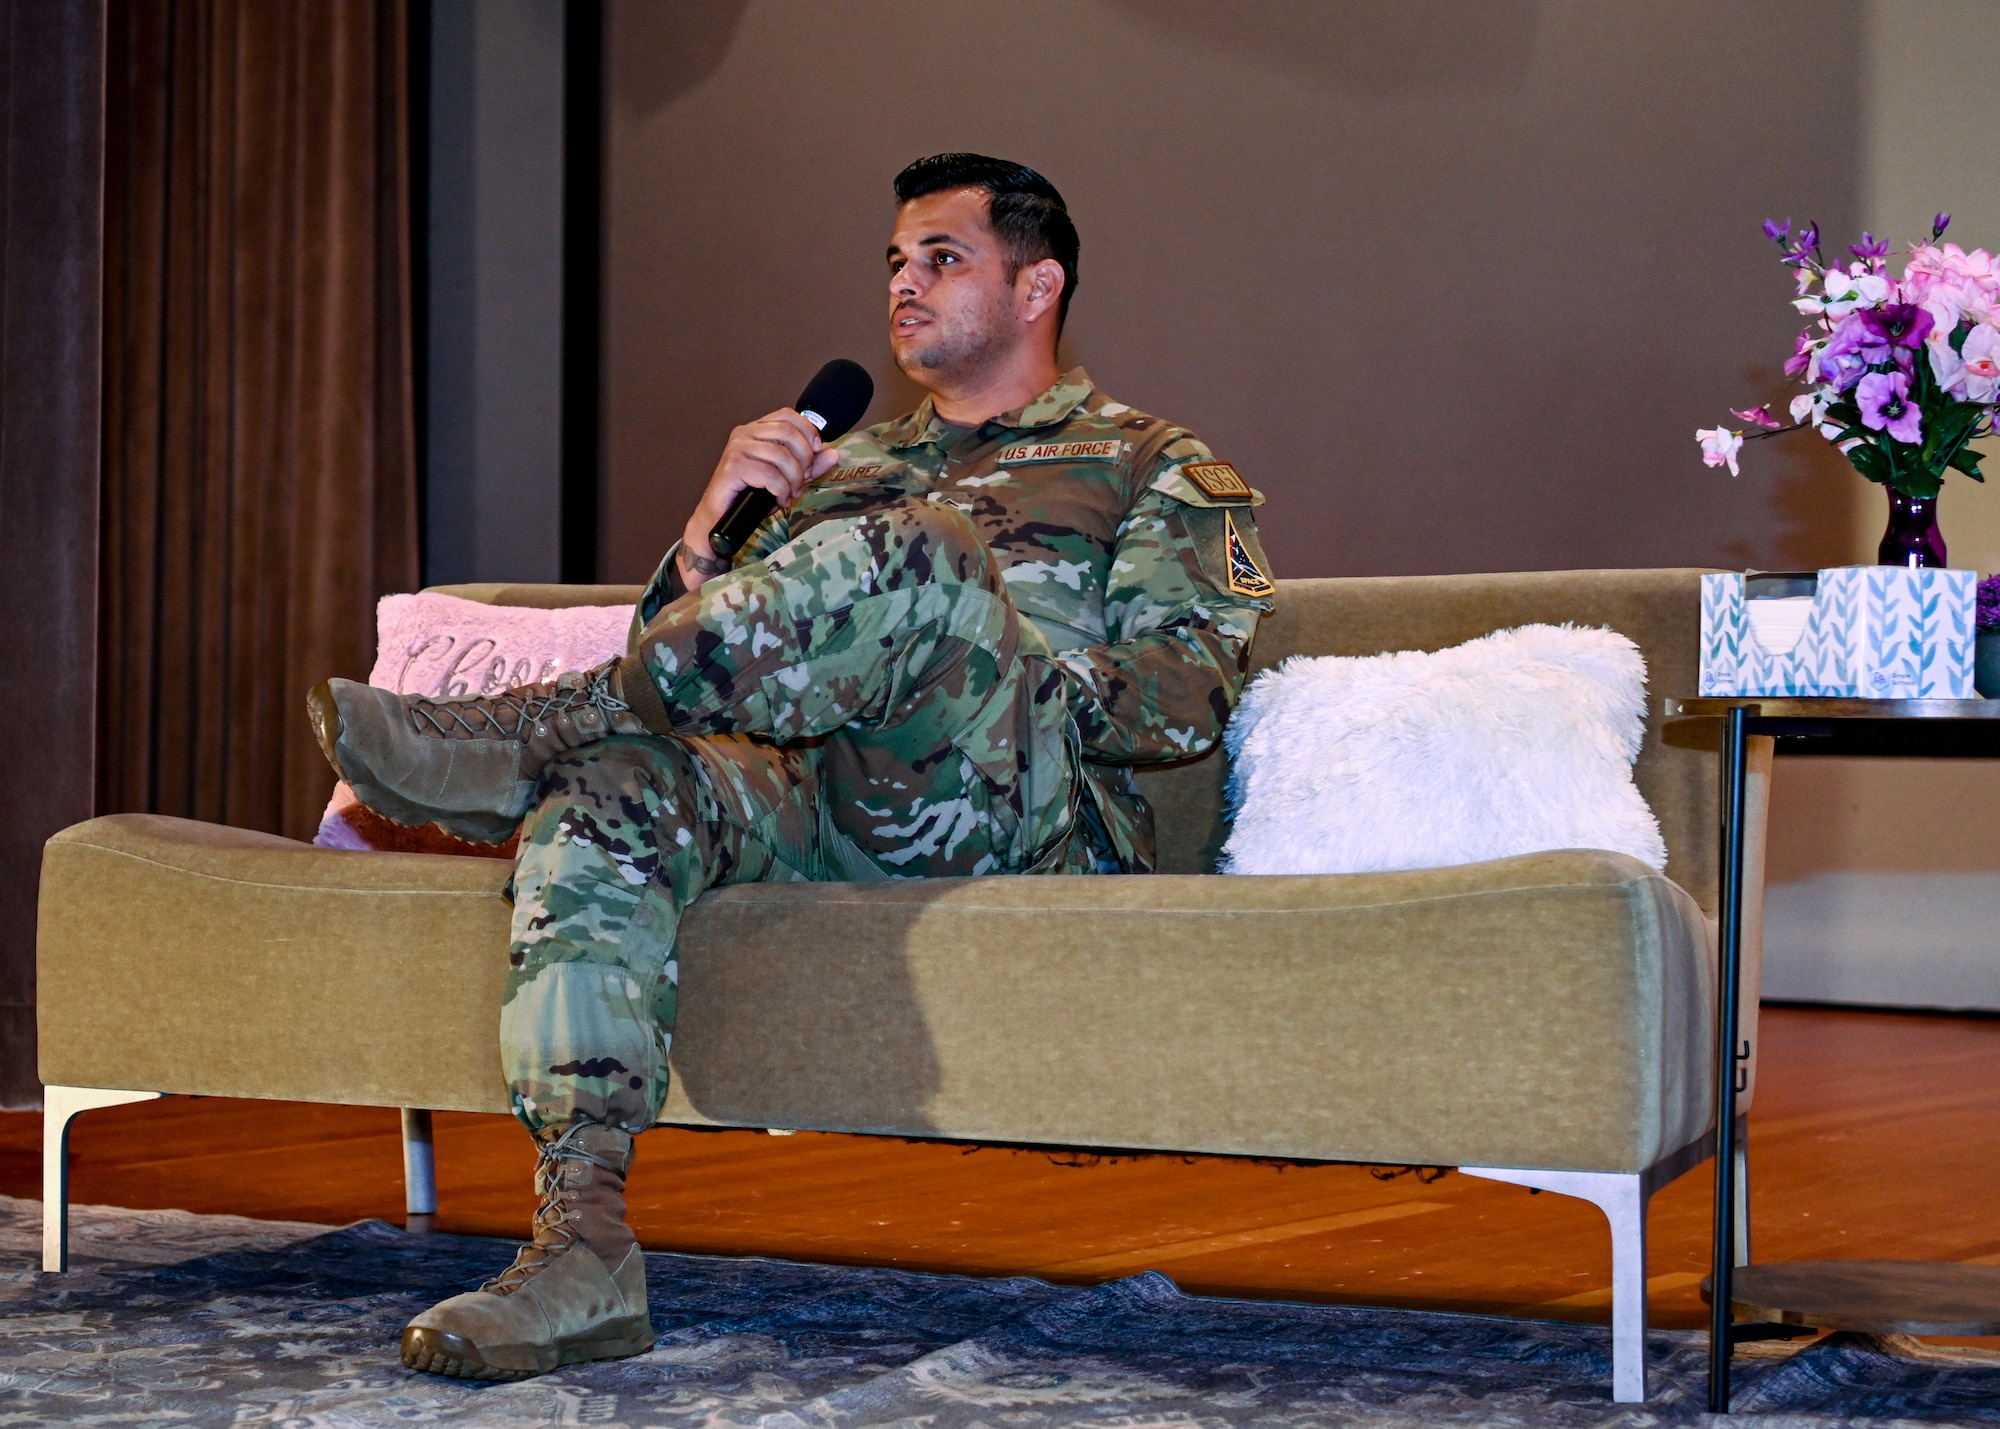 U.S. Air Force Master Sgt. Octavio Juarez, 30th Logistics Readiness Squadron first sergeant, shares his story of resiliency and triumph during an event hosted at the theater on Vandenberg Space Force Base, Calif., June 27, 2023. Five Air Force members presented their powerful narratives in front of a live audience to inspire unity, promote mental health awareness, and foster a culture of support within the military community. The event was sponsored by the Women of Vandenberg Empowerment Network and the chapel. (U.S. Space Force Photo by Senior Airman Tiarra Sibley)